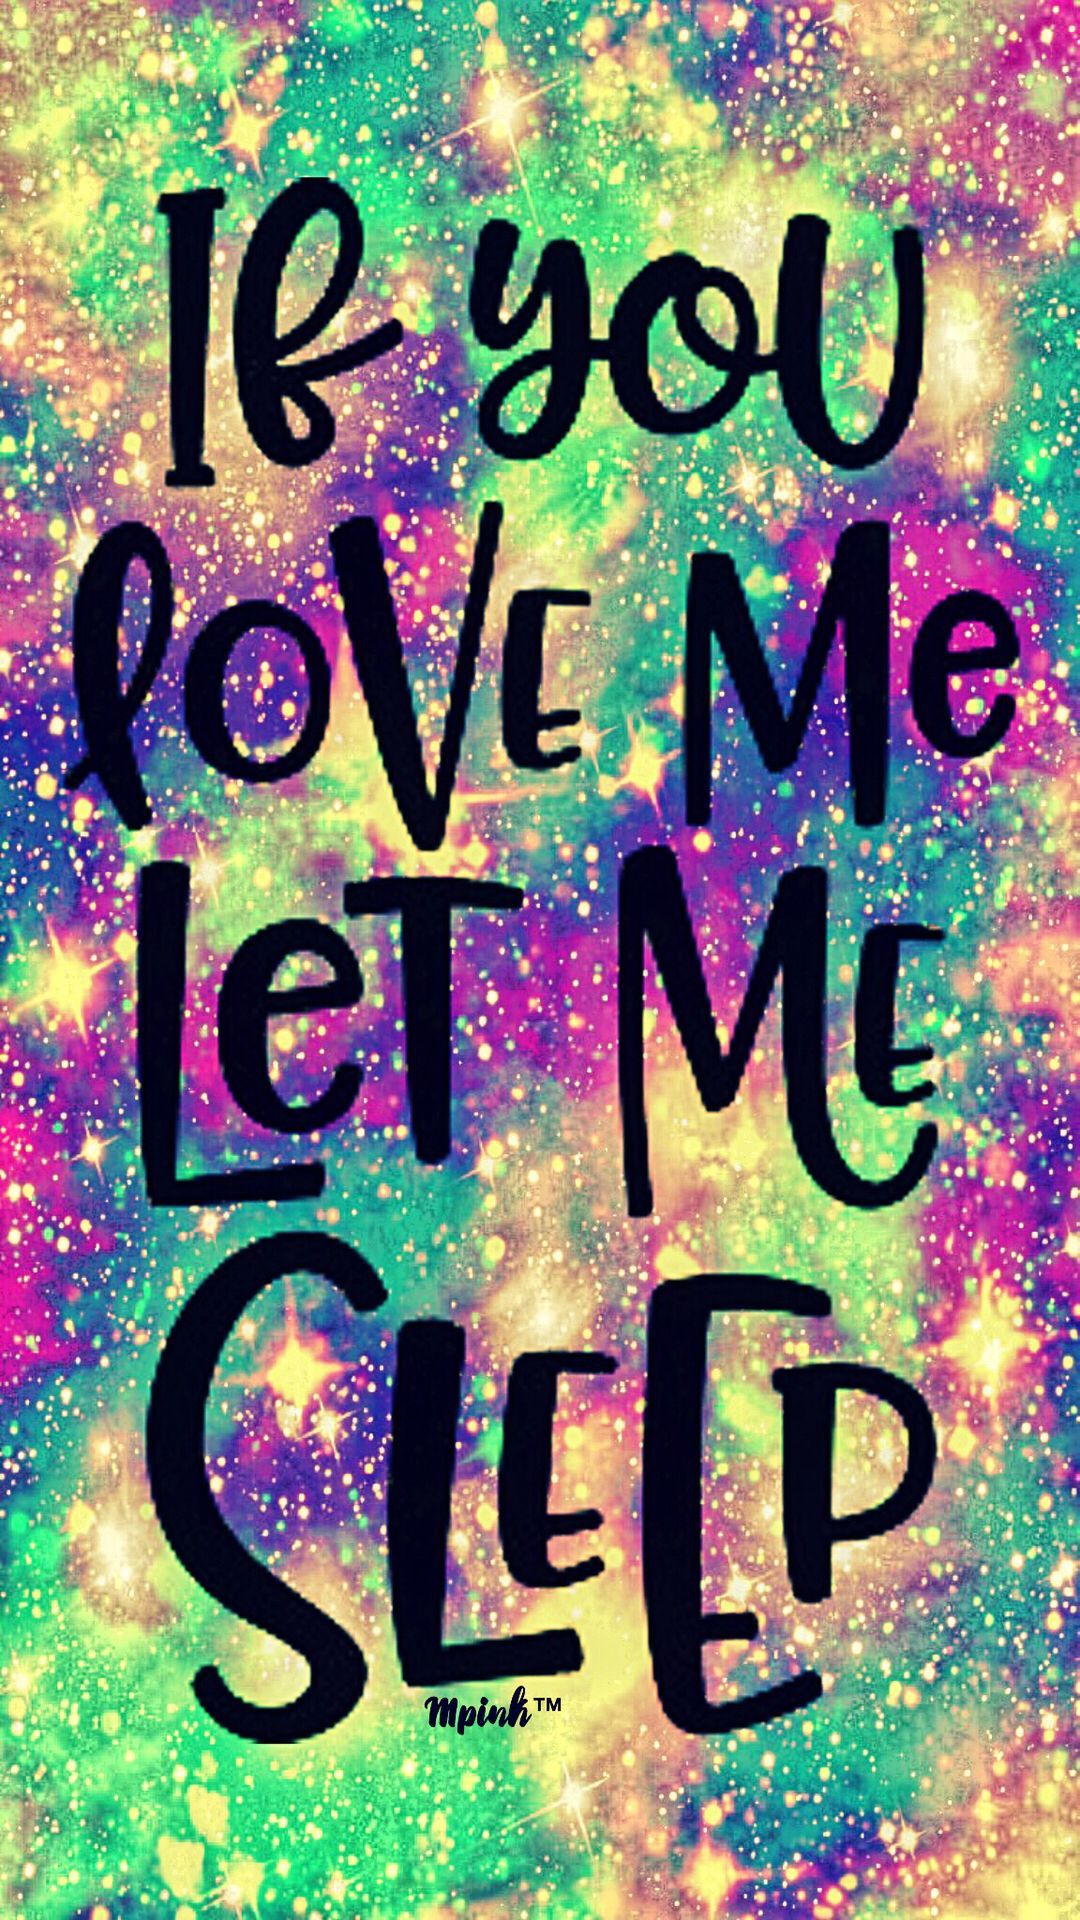 If You Love Me Let Me Sleep Galaxy Wallpaper #androidwallpaper #iphonewallpaper #wallpaper #gal. Wallpaper quotes, Funny quotes wallpaper, Galaxy wallpaper quotes